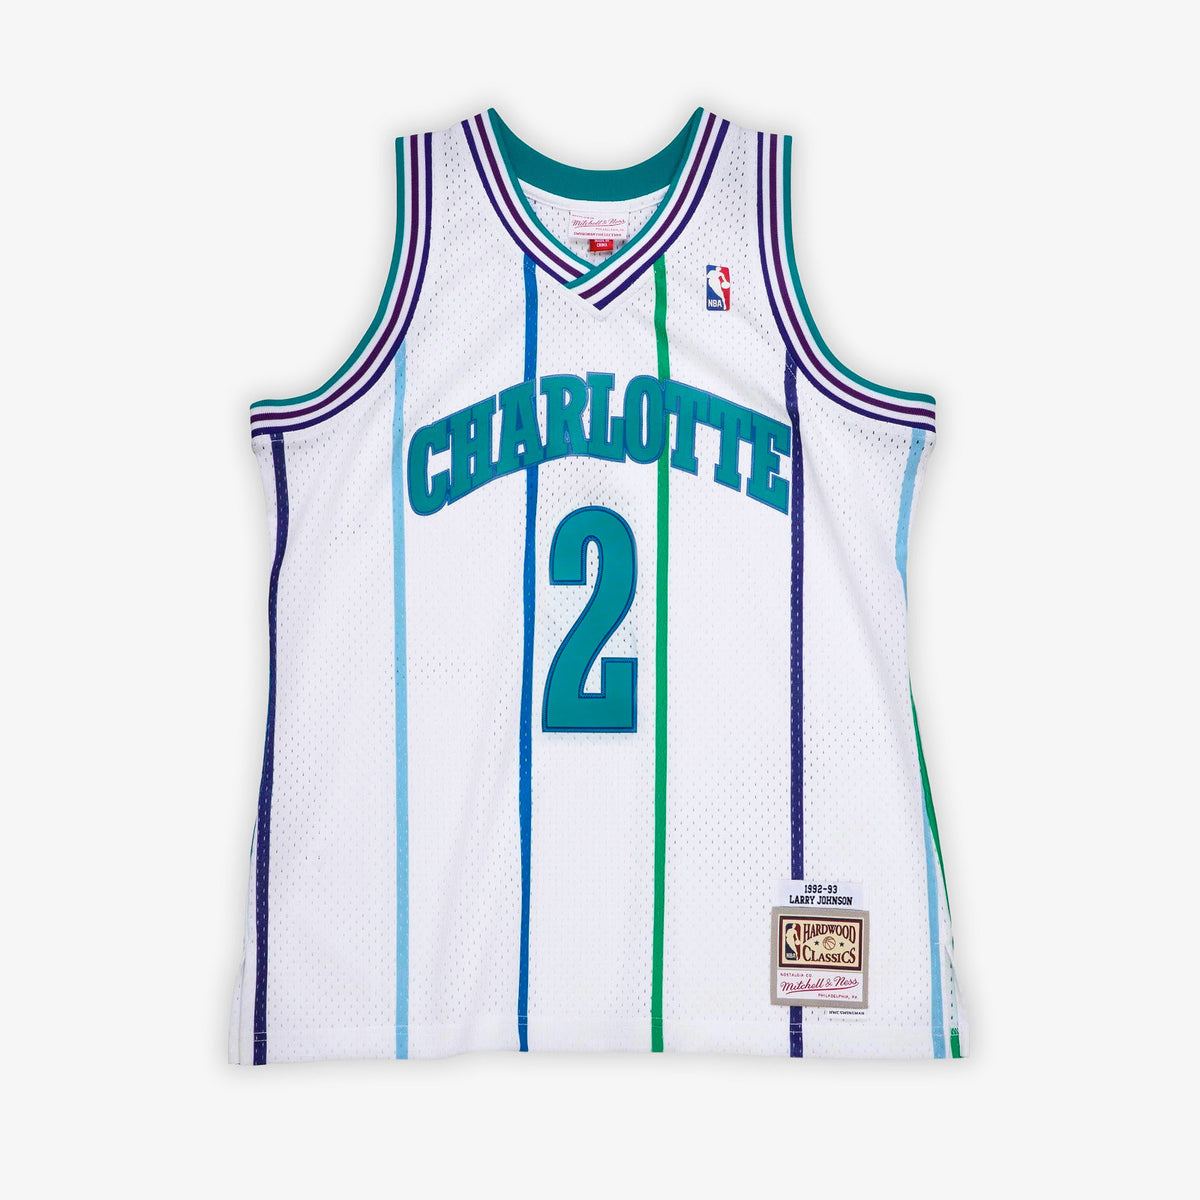 Mitchell & Ness shorts Charlotte Hornets City Collection Mesh Short teal/ purple